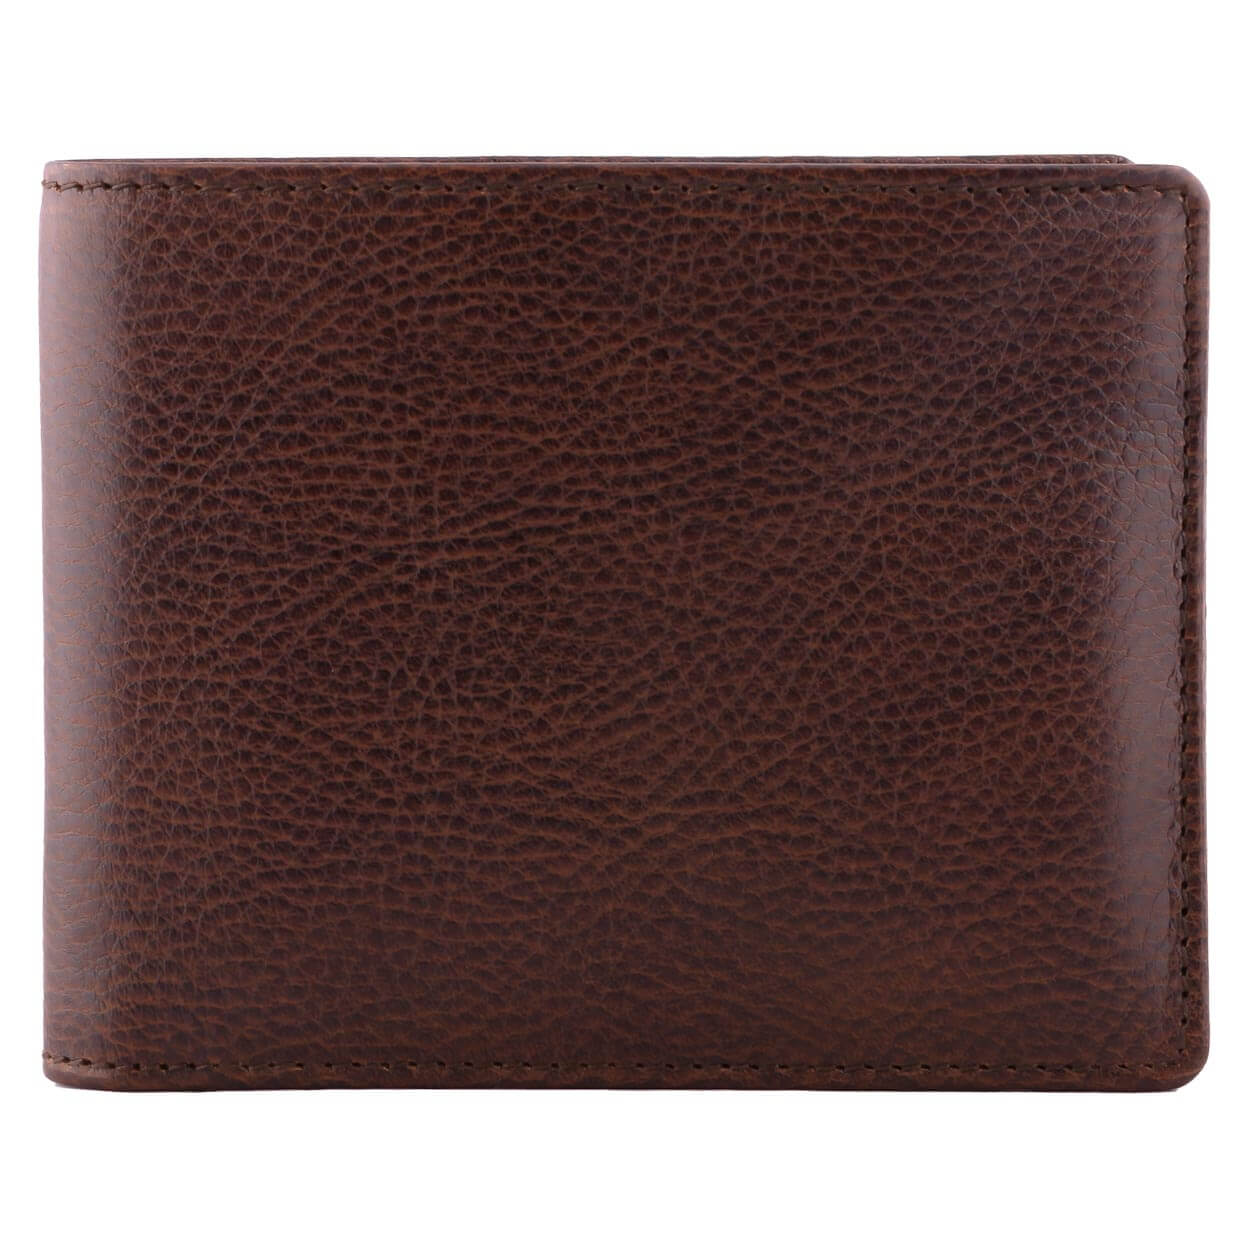 Dnero men's wallet in soft green leather